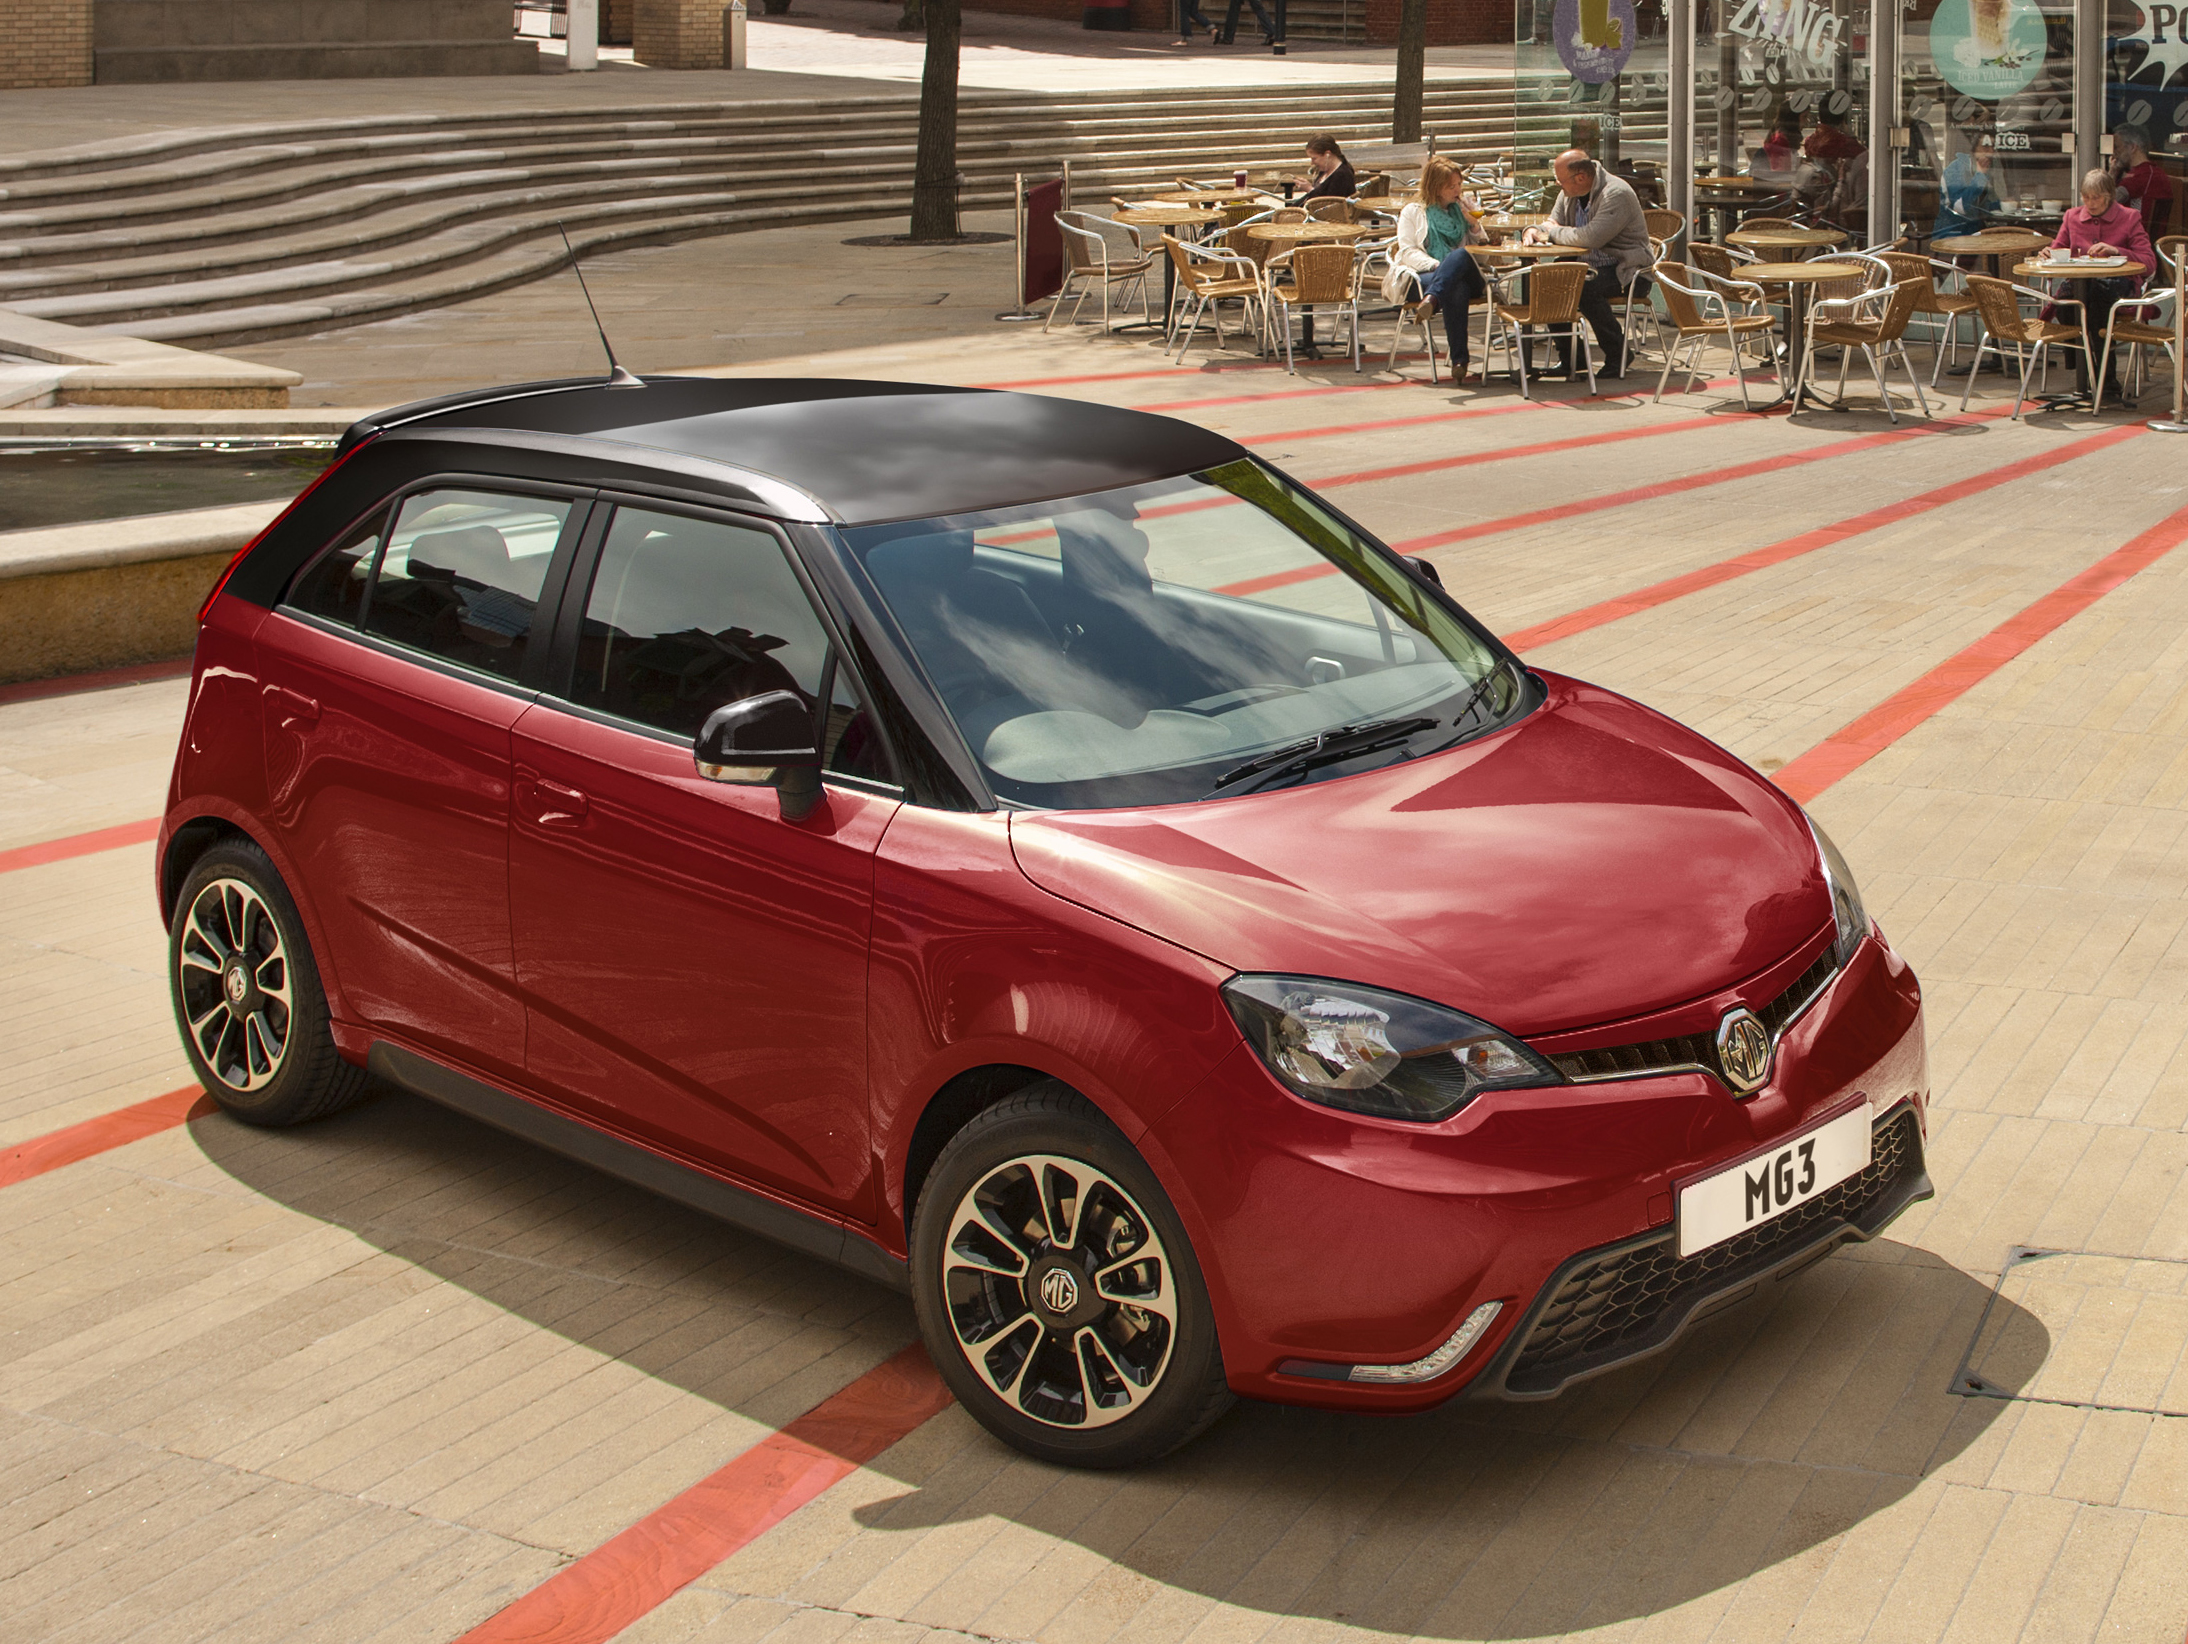 MG3 refreshed for 2016